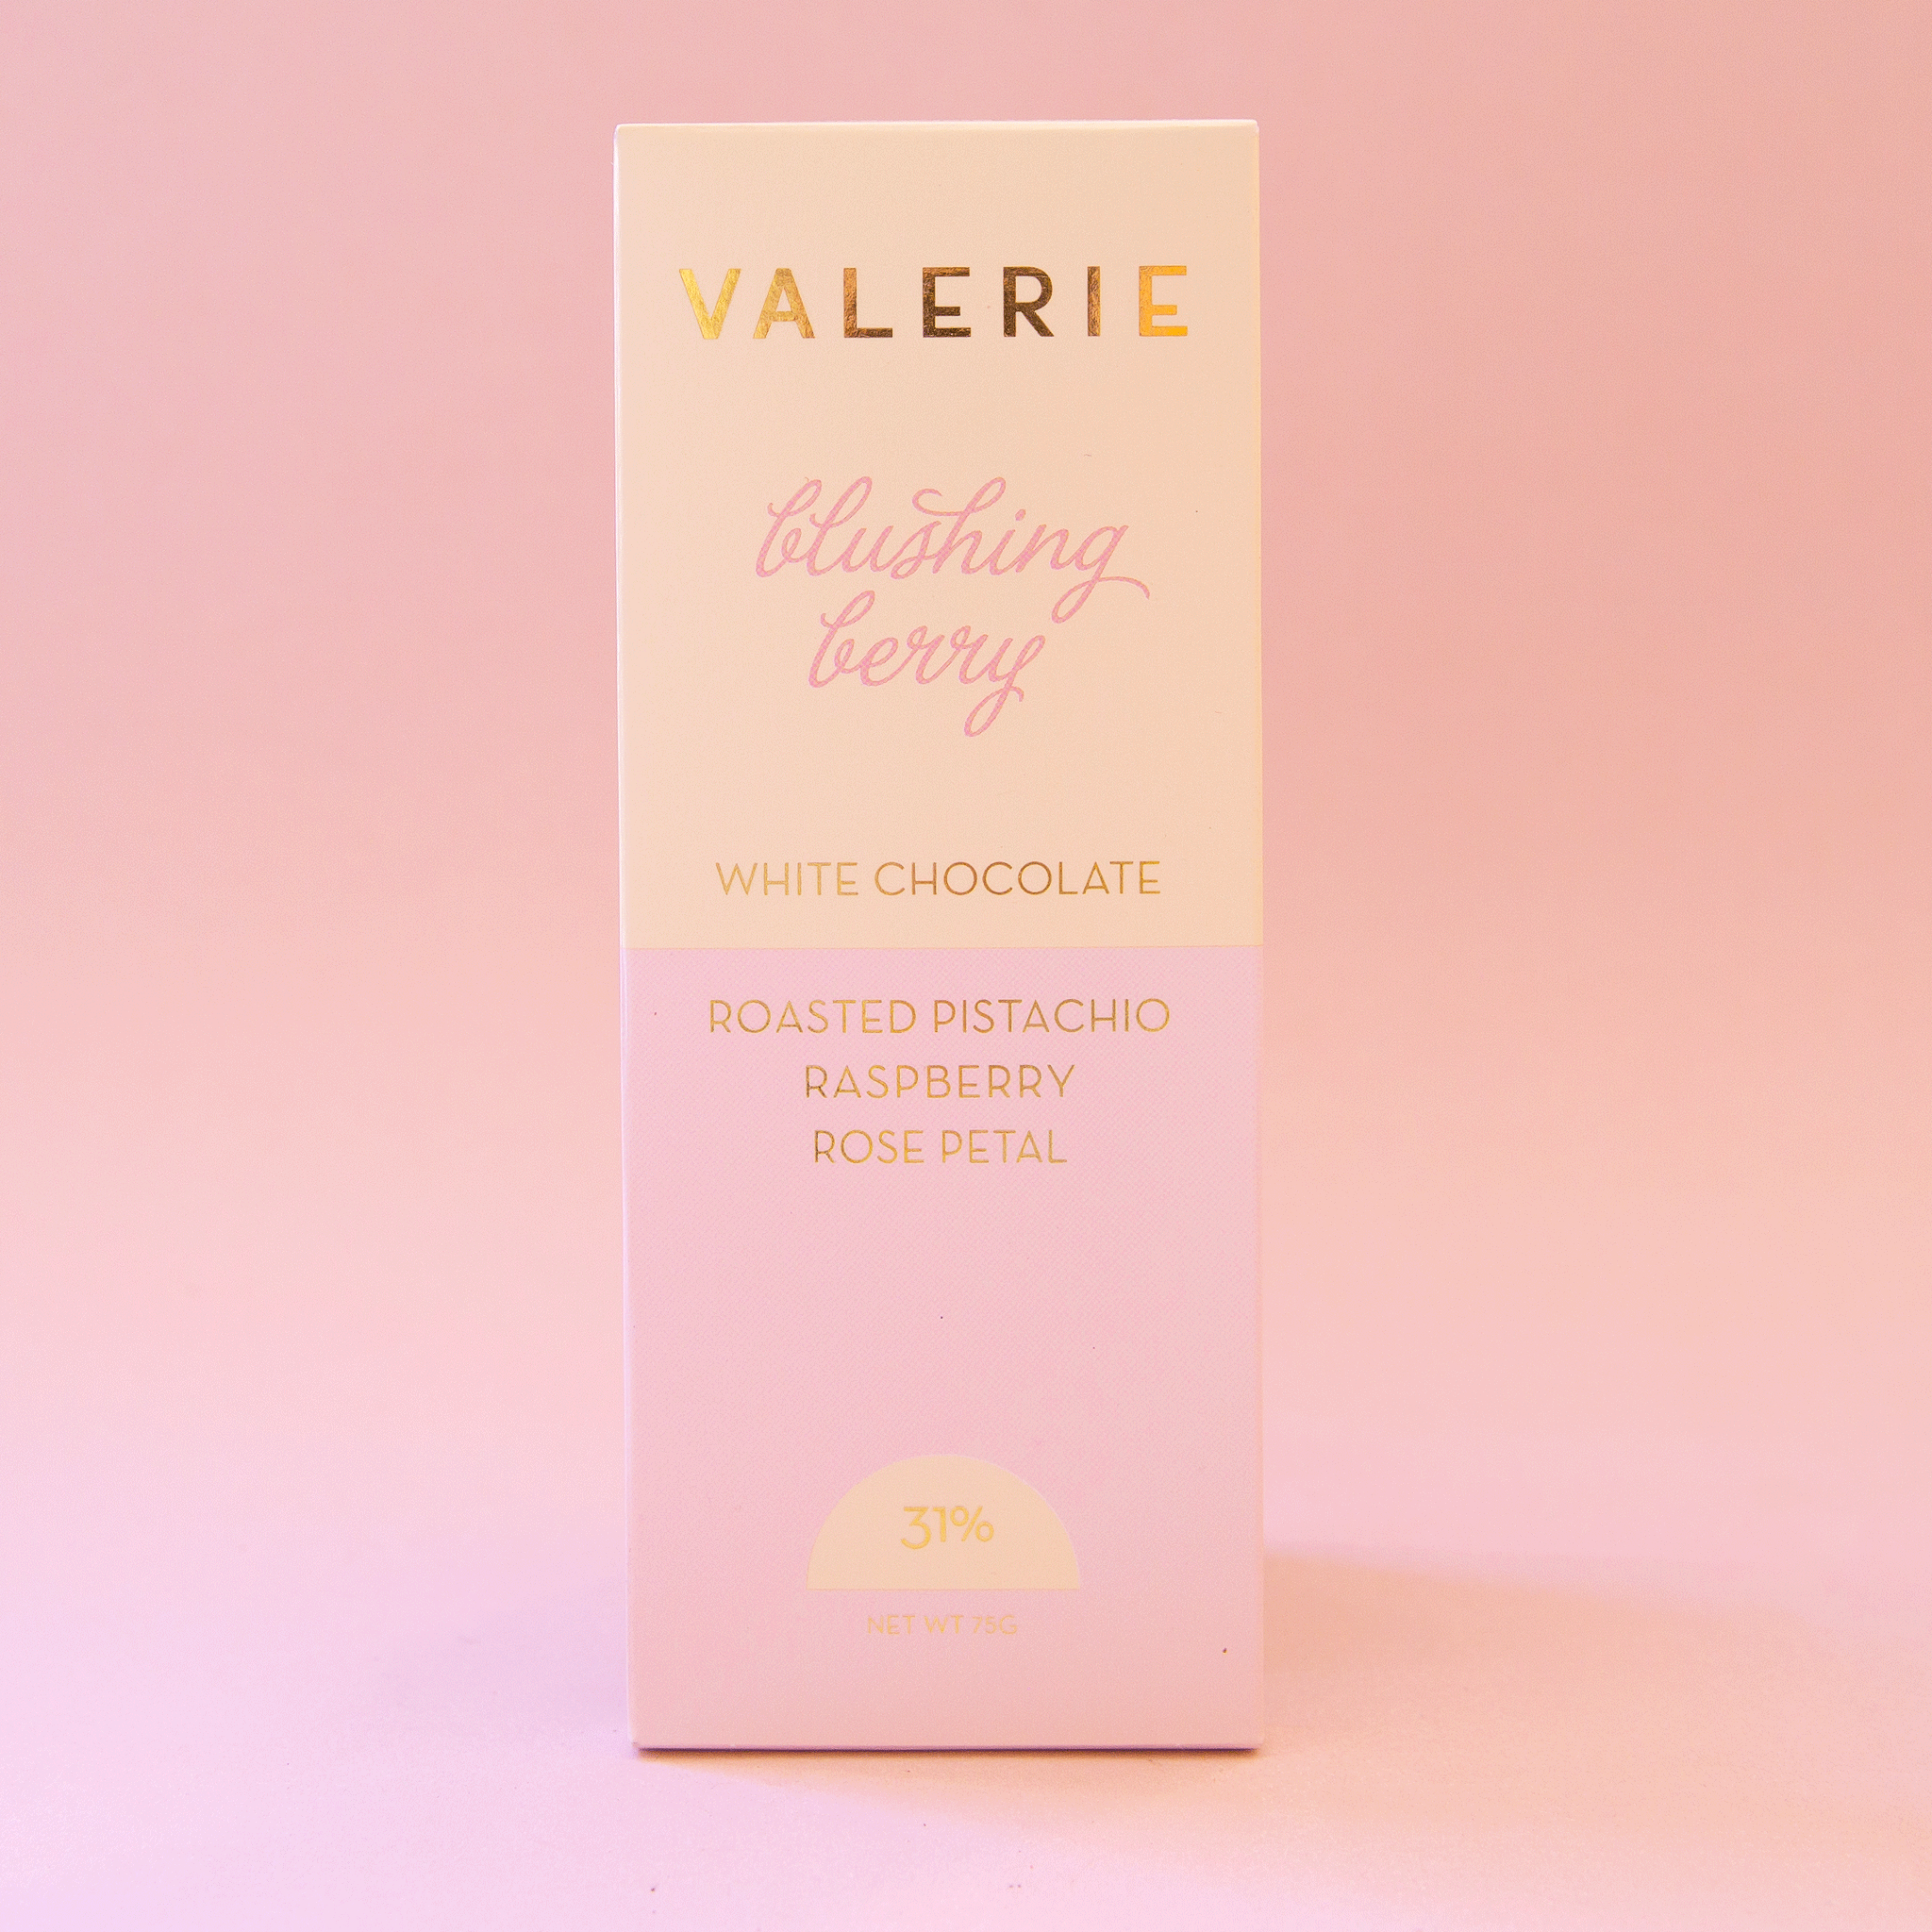 On a pink background is a light pink and ivory packaged white chocolate bar that reads, "Valerie blushing berry White Chocolate Roasted Pistachio, Raspberry, Rose Petal".